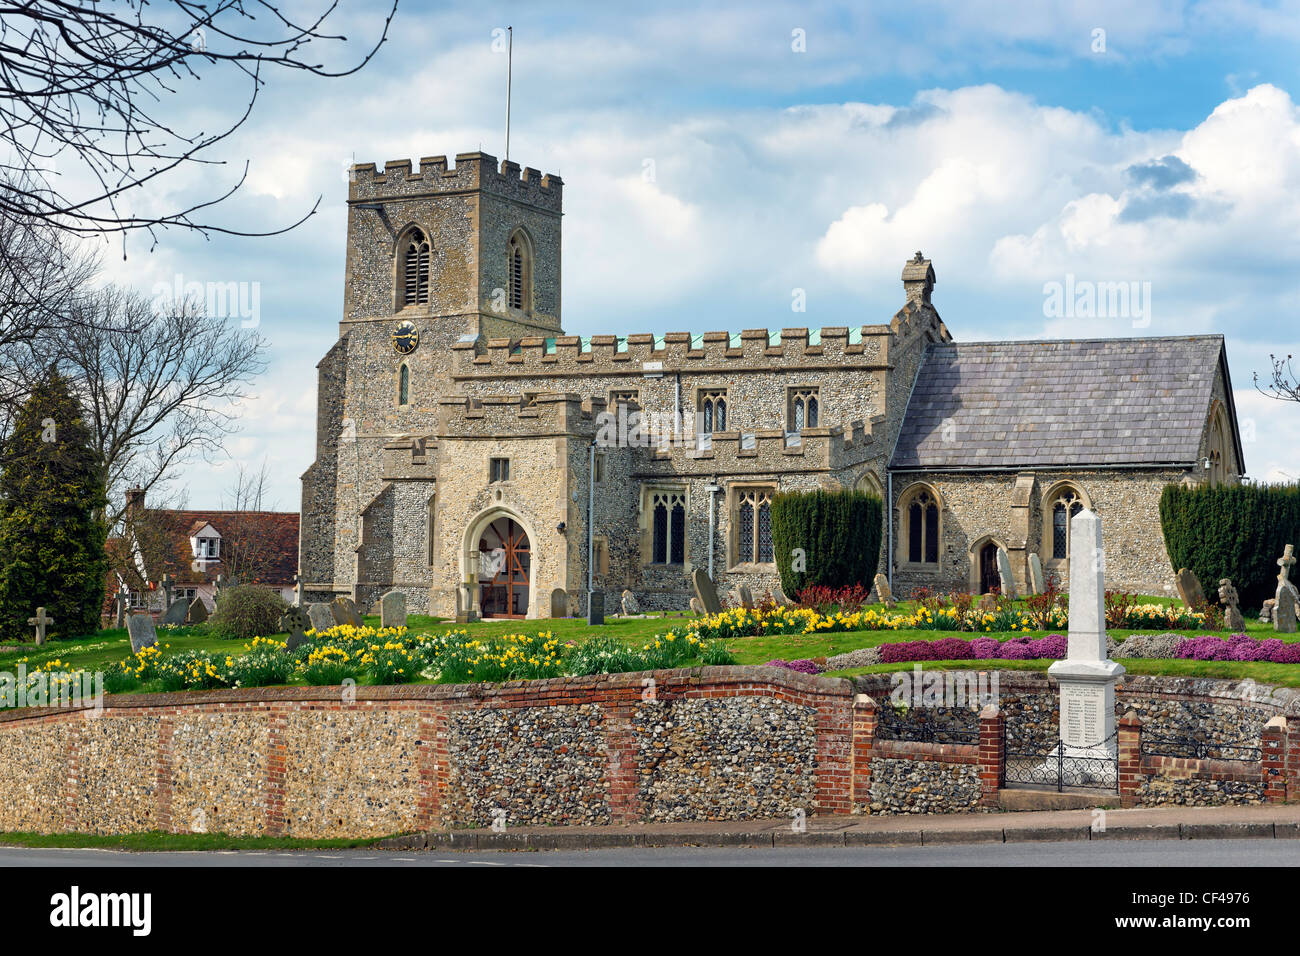 St. Swithun's Church, situated on high ground at the Cross Roads, was founded in 1136 by Geffrey de Magnaville under the Monaste Stock Photo